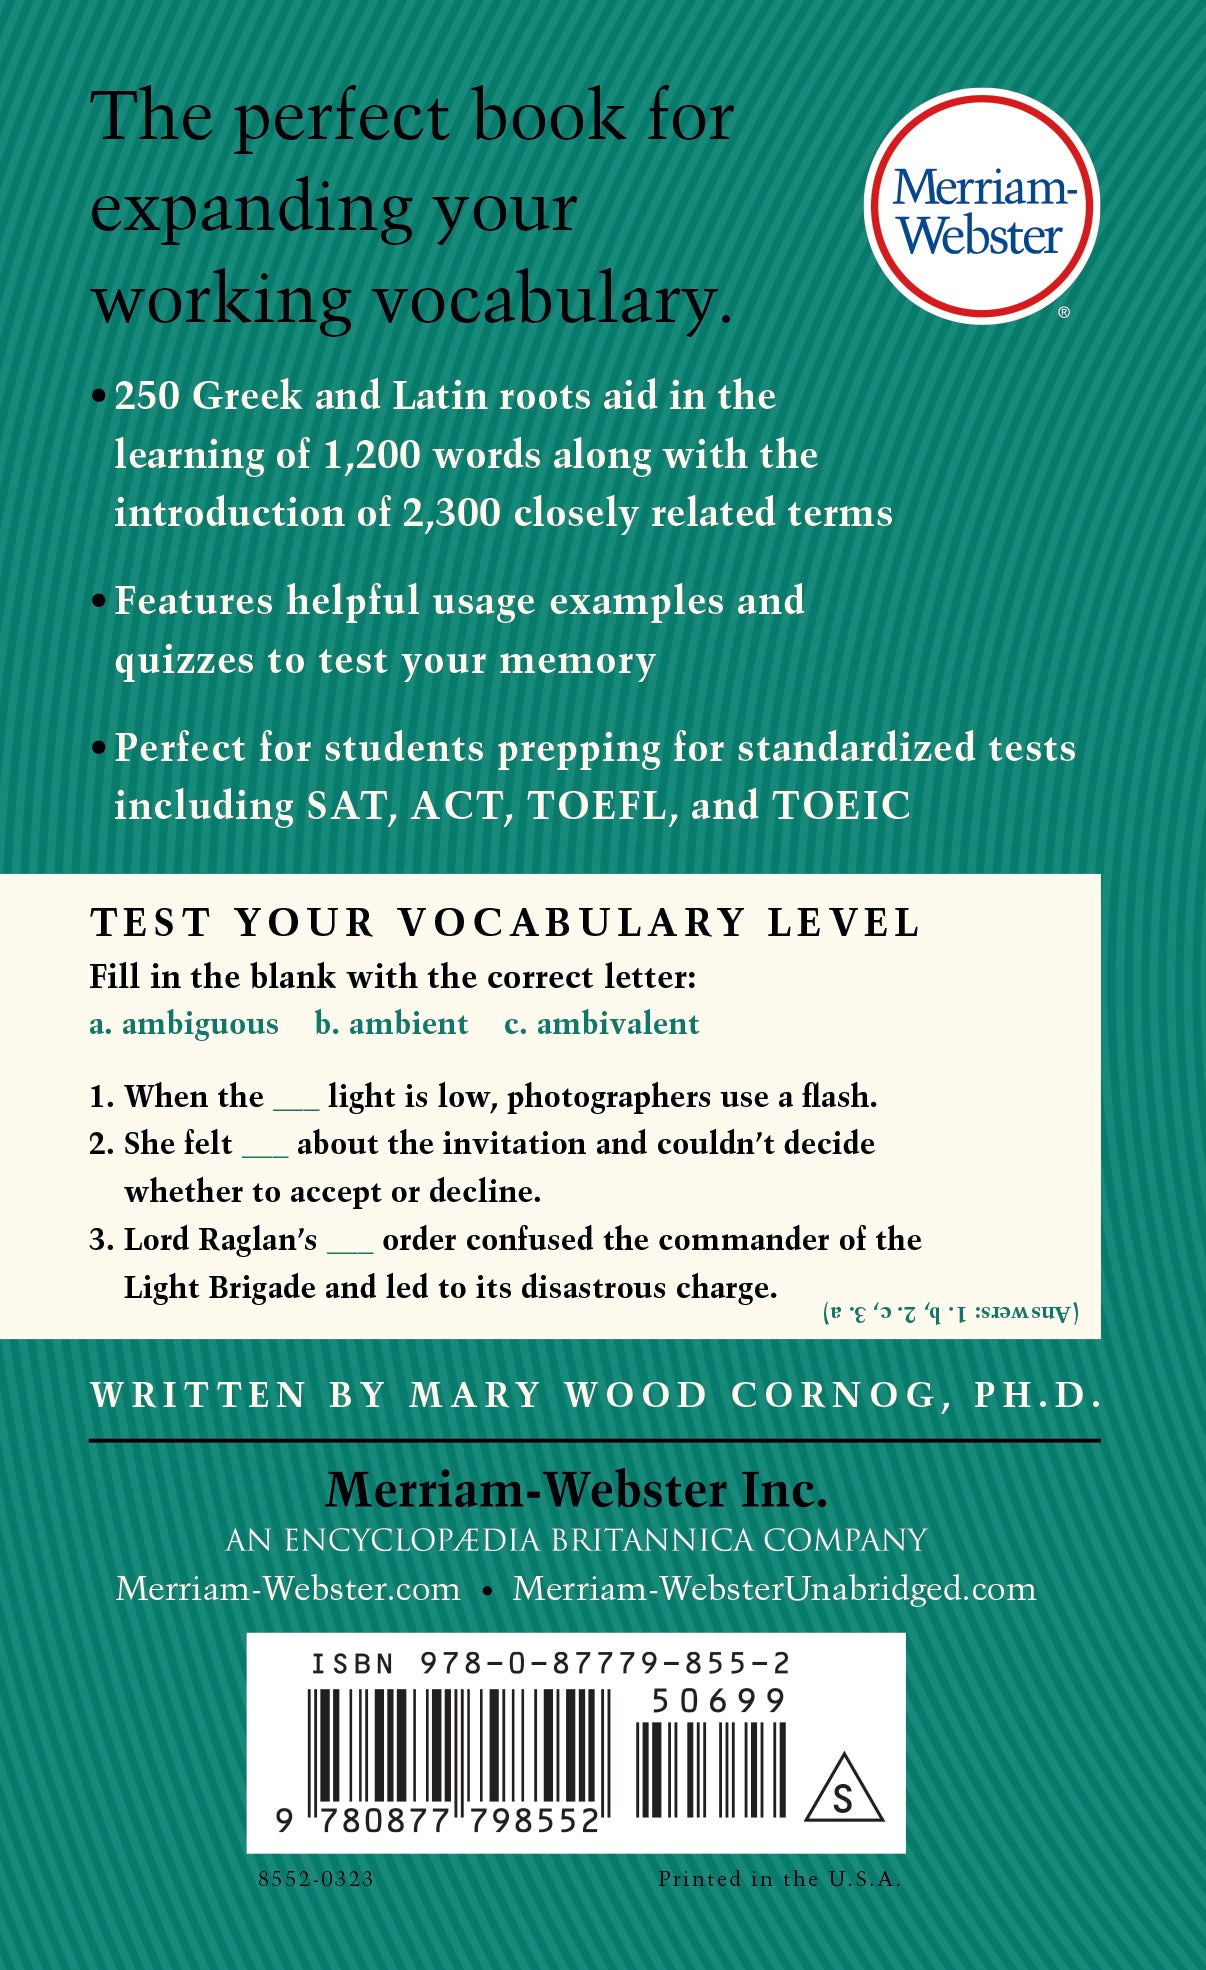 The Merriam-Webster Vocabulary Builder back cover